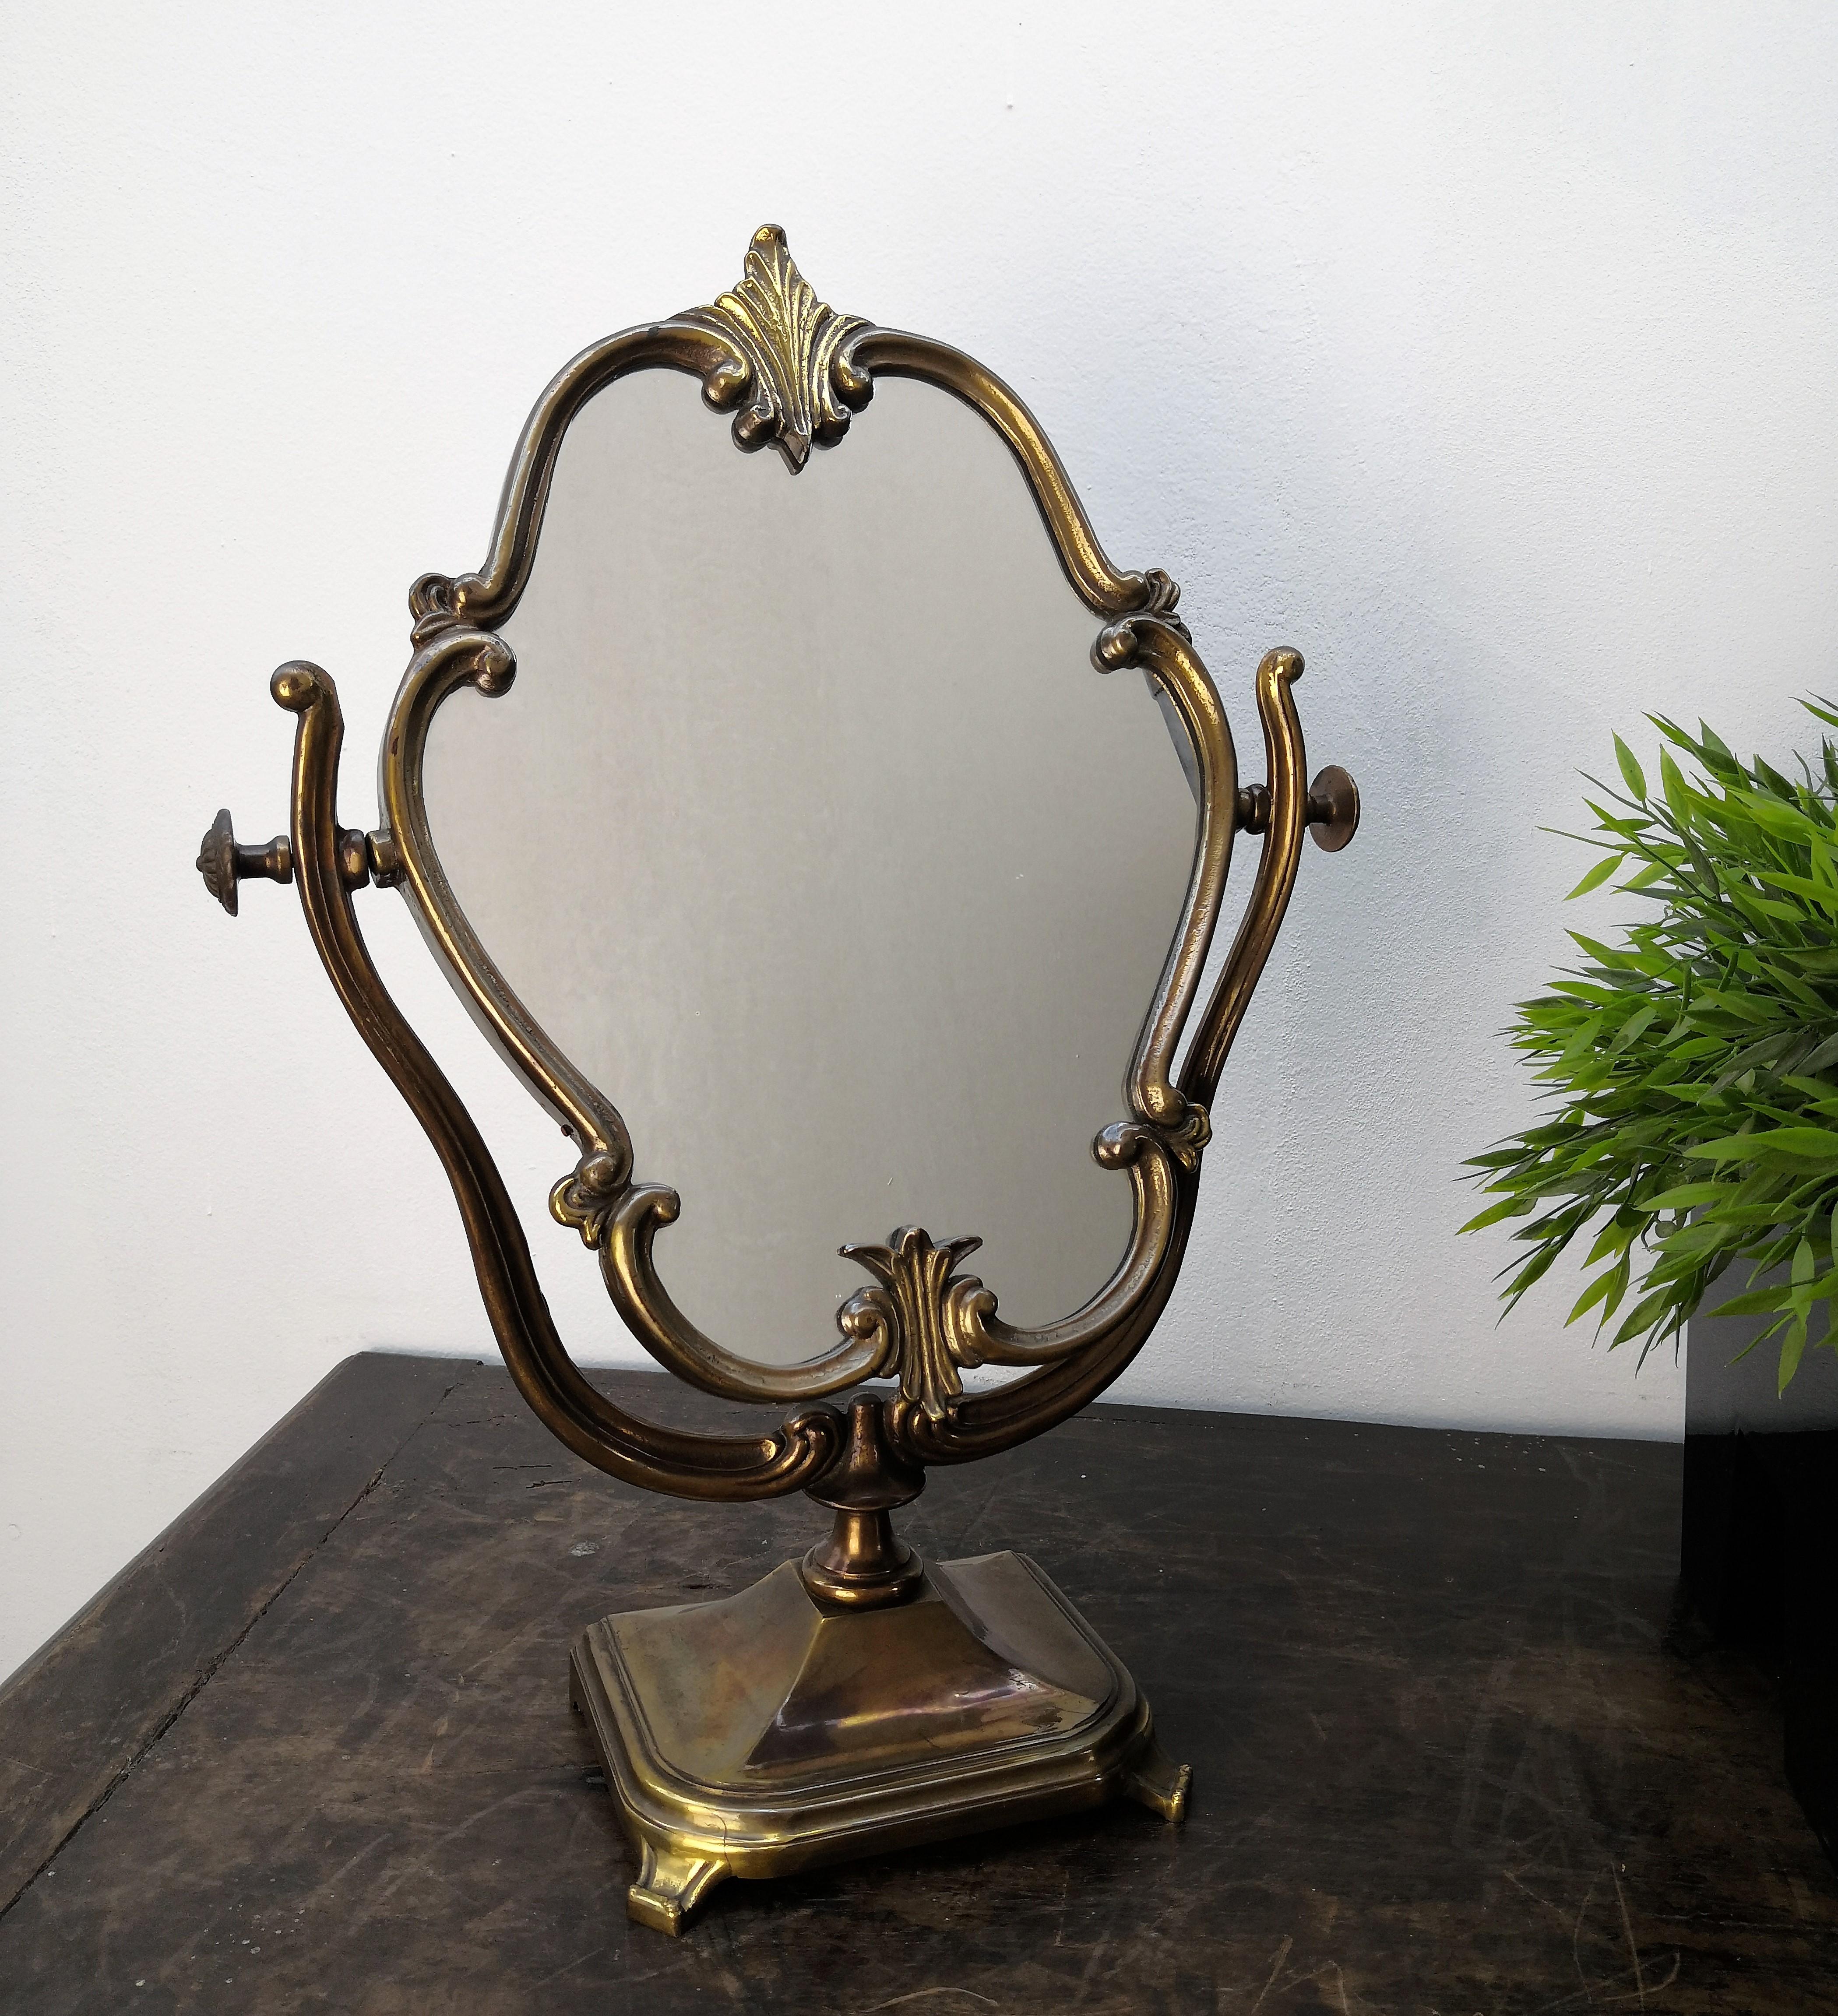 Beautiful Italian antique gilt bronze 20th century miniature vanity tabletop cheval mirror. Set on a square base from which two curved legs hold the mirror with adjustment screws to the top and with decorated bases of leaf and dart decoration. The